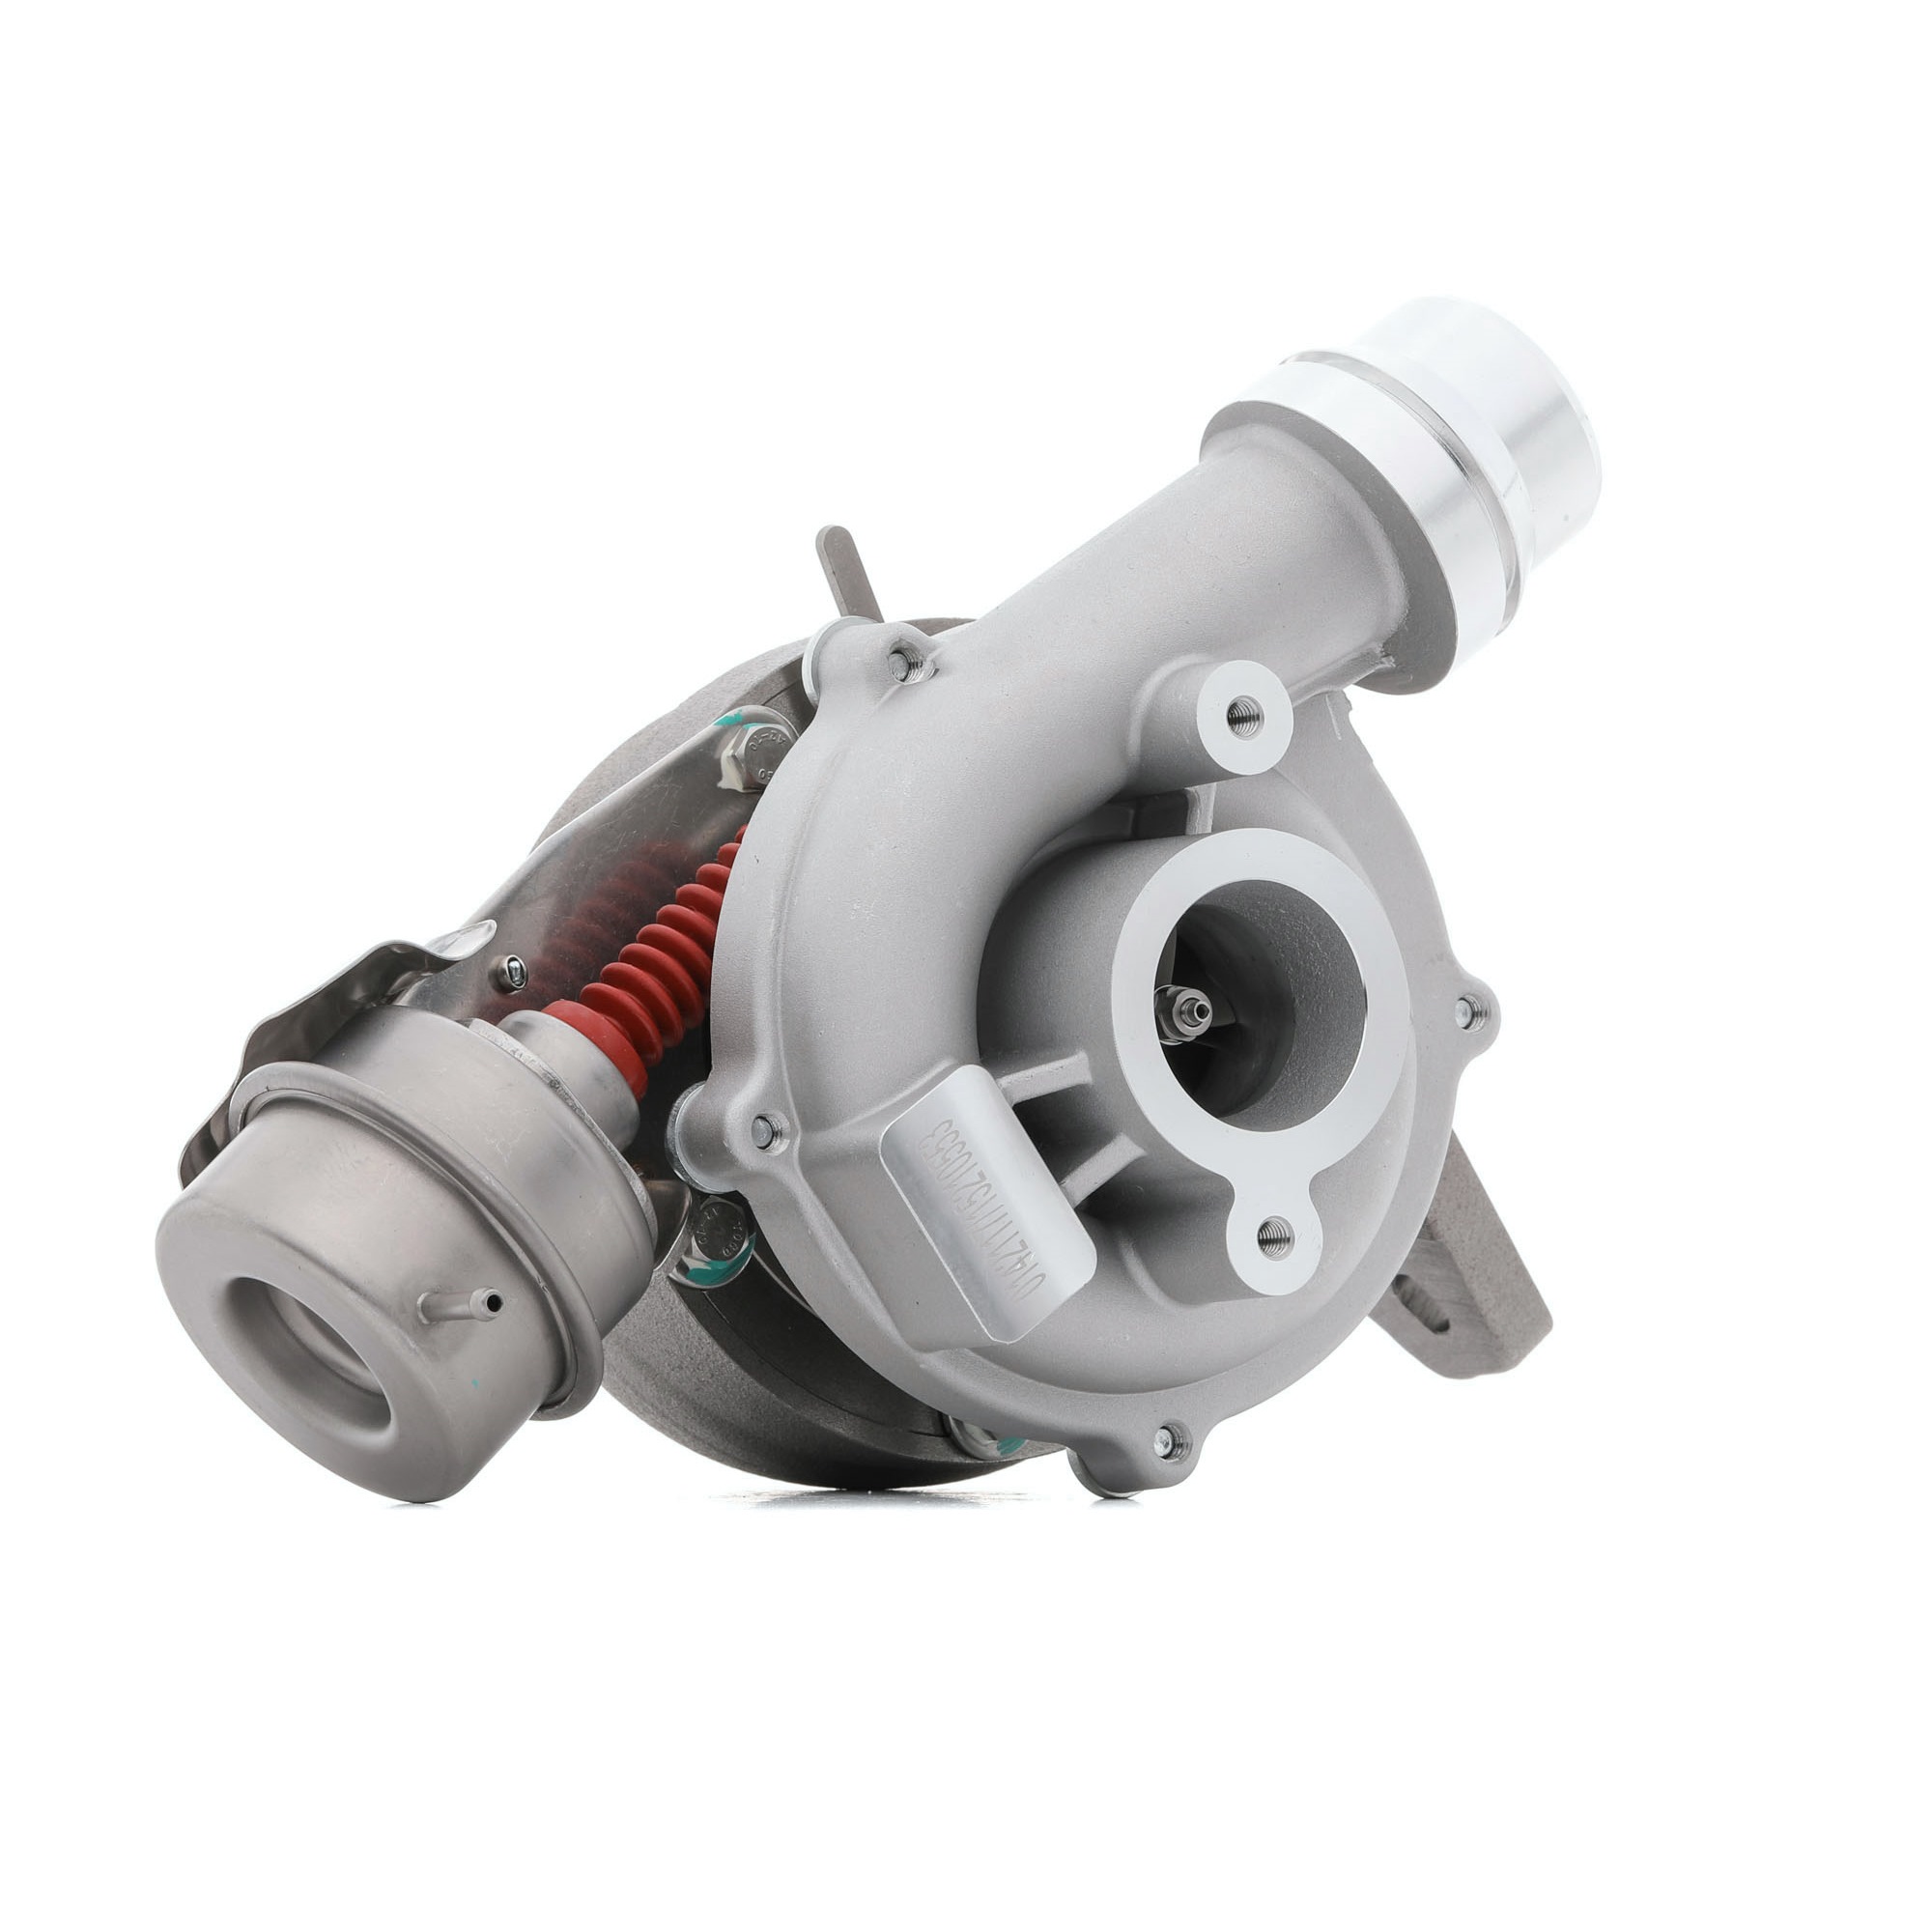 SKCT-1190208 STARK Turbocharger DACIA Exhaust Turbocharger, Pneumatic, with gaskets/seals